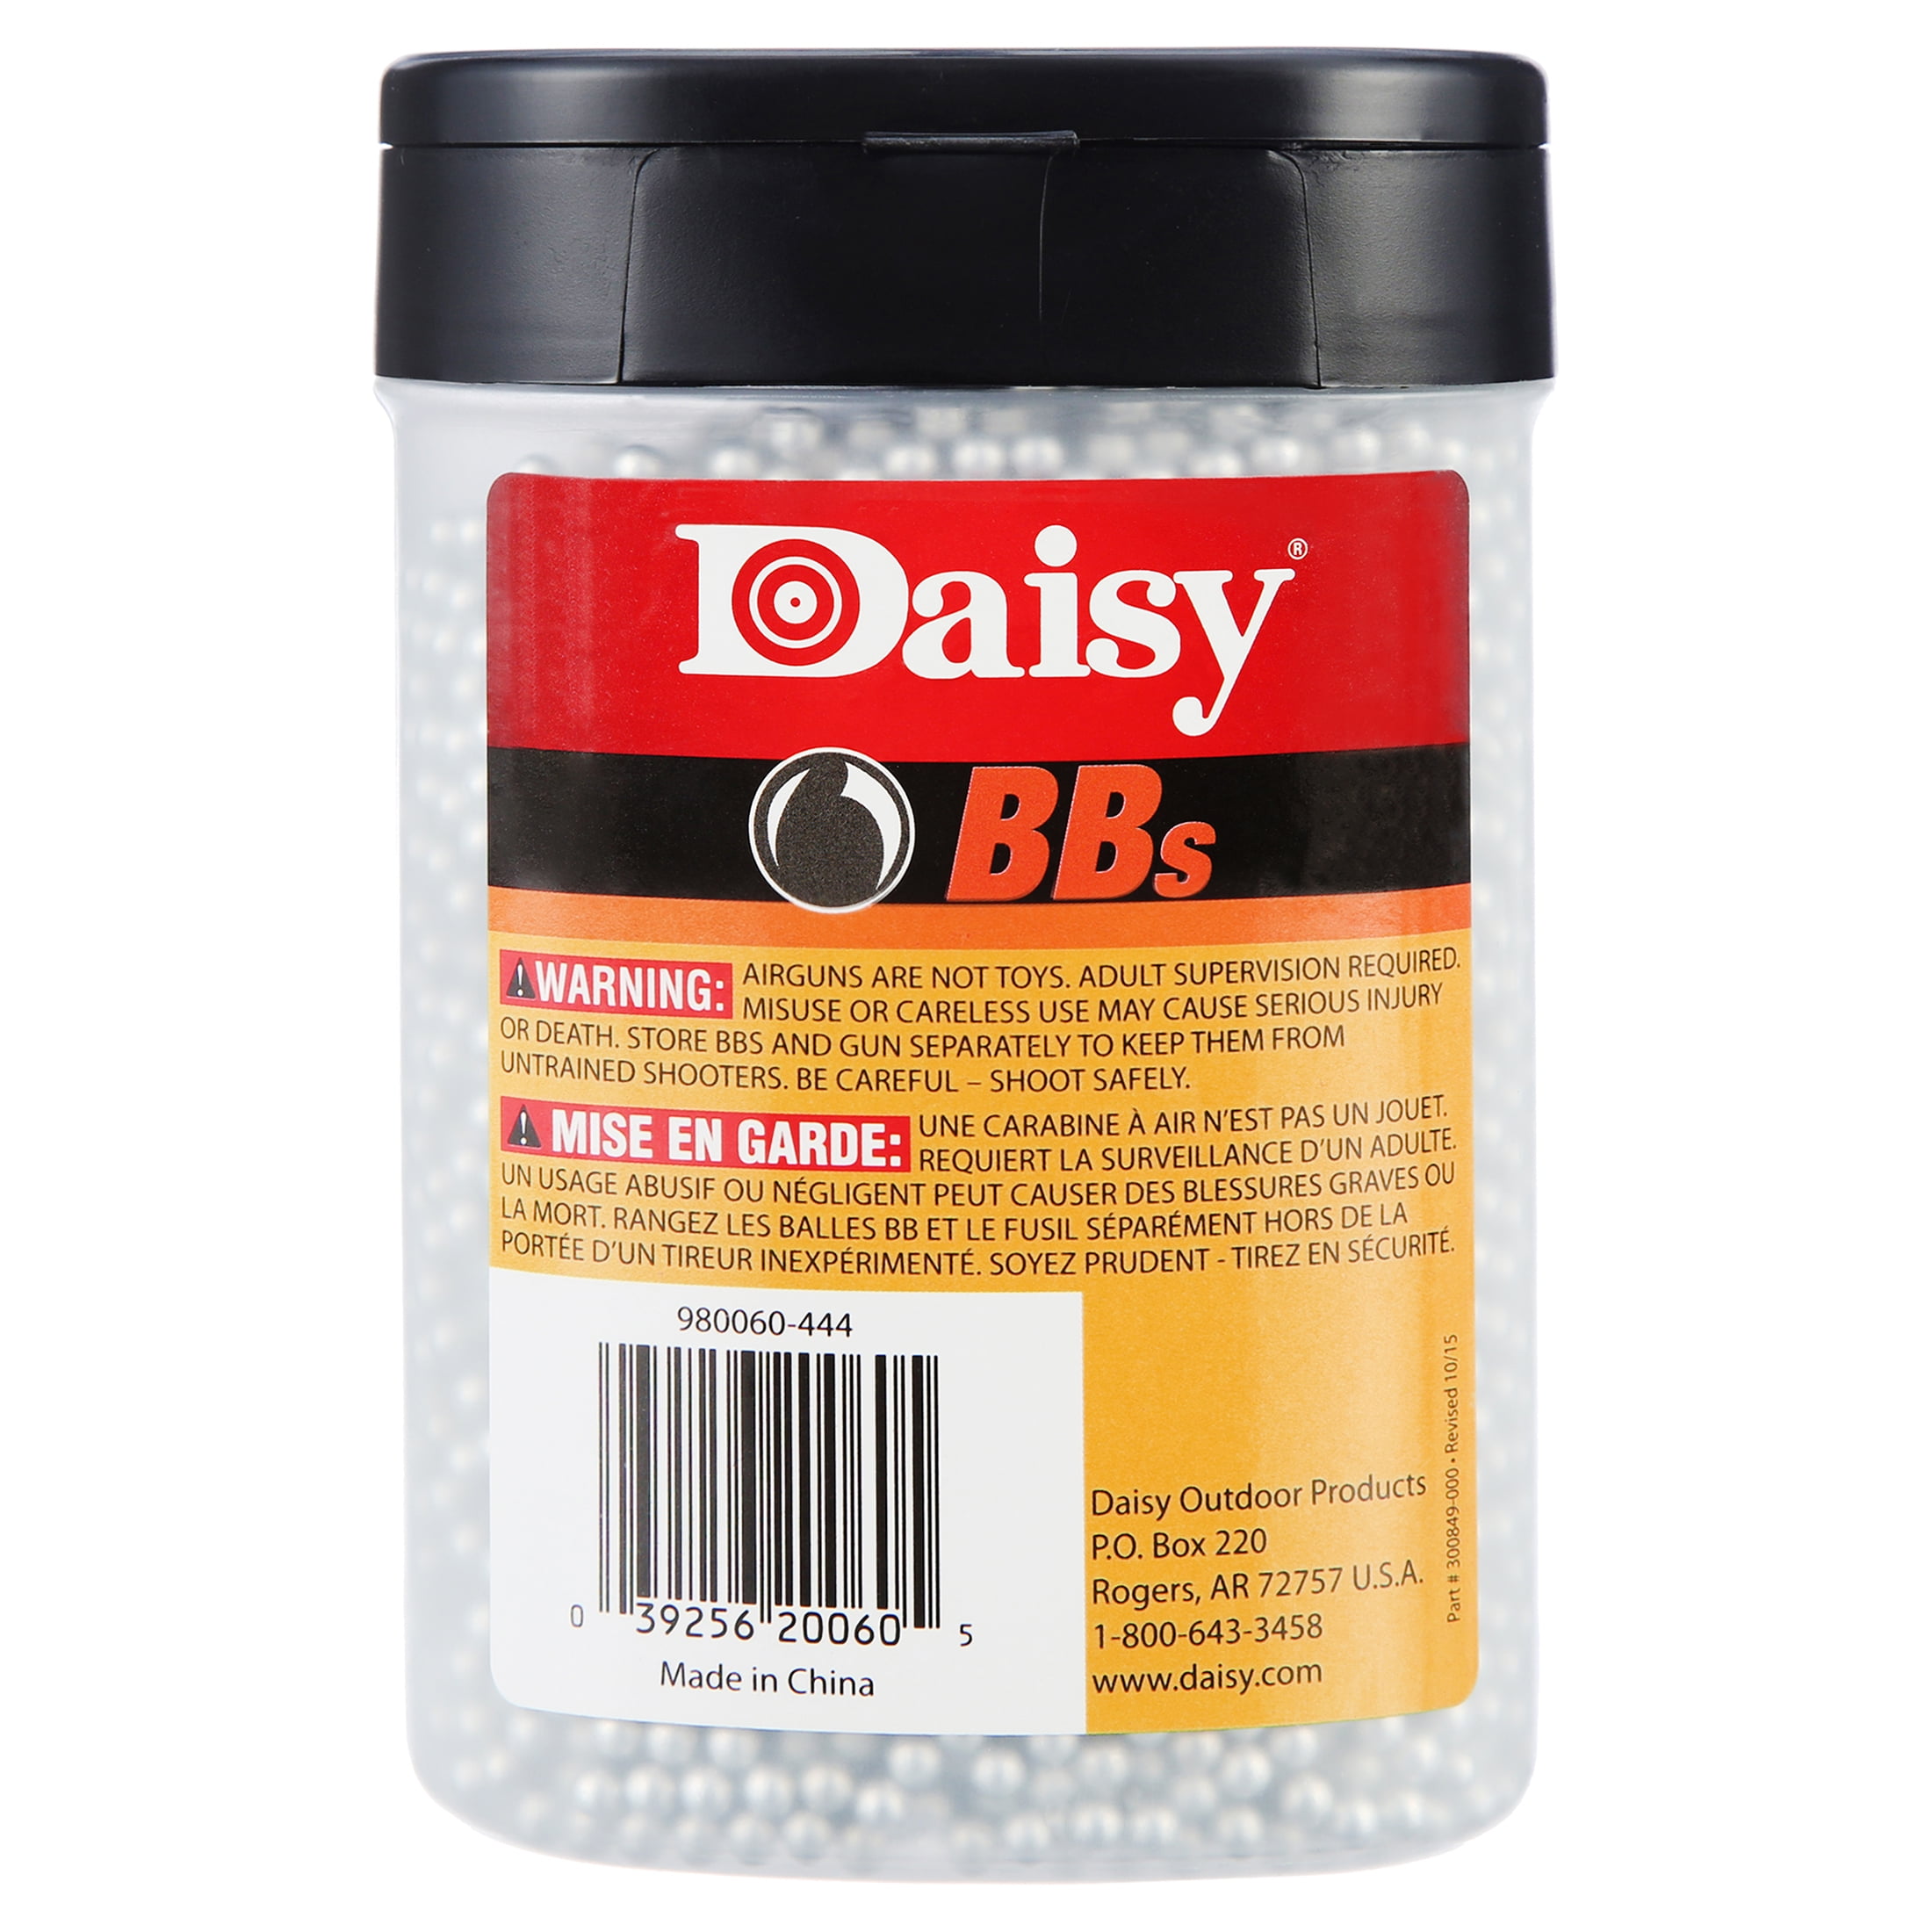 LOT OF 6 Daisy Pointed 987777-406 Precision Max Pellets .177 Caliber 250 Count 39256077771 